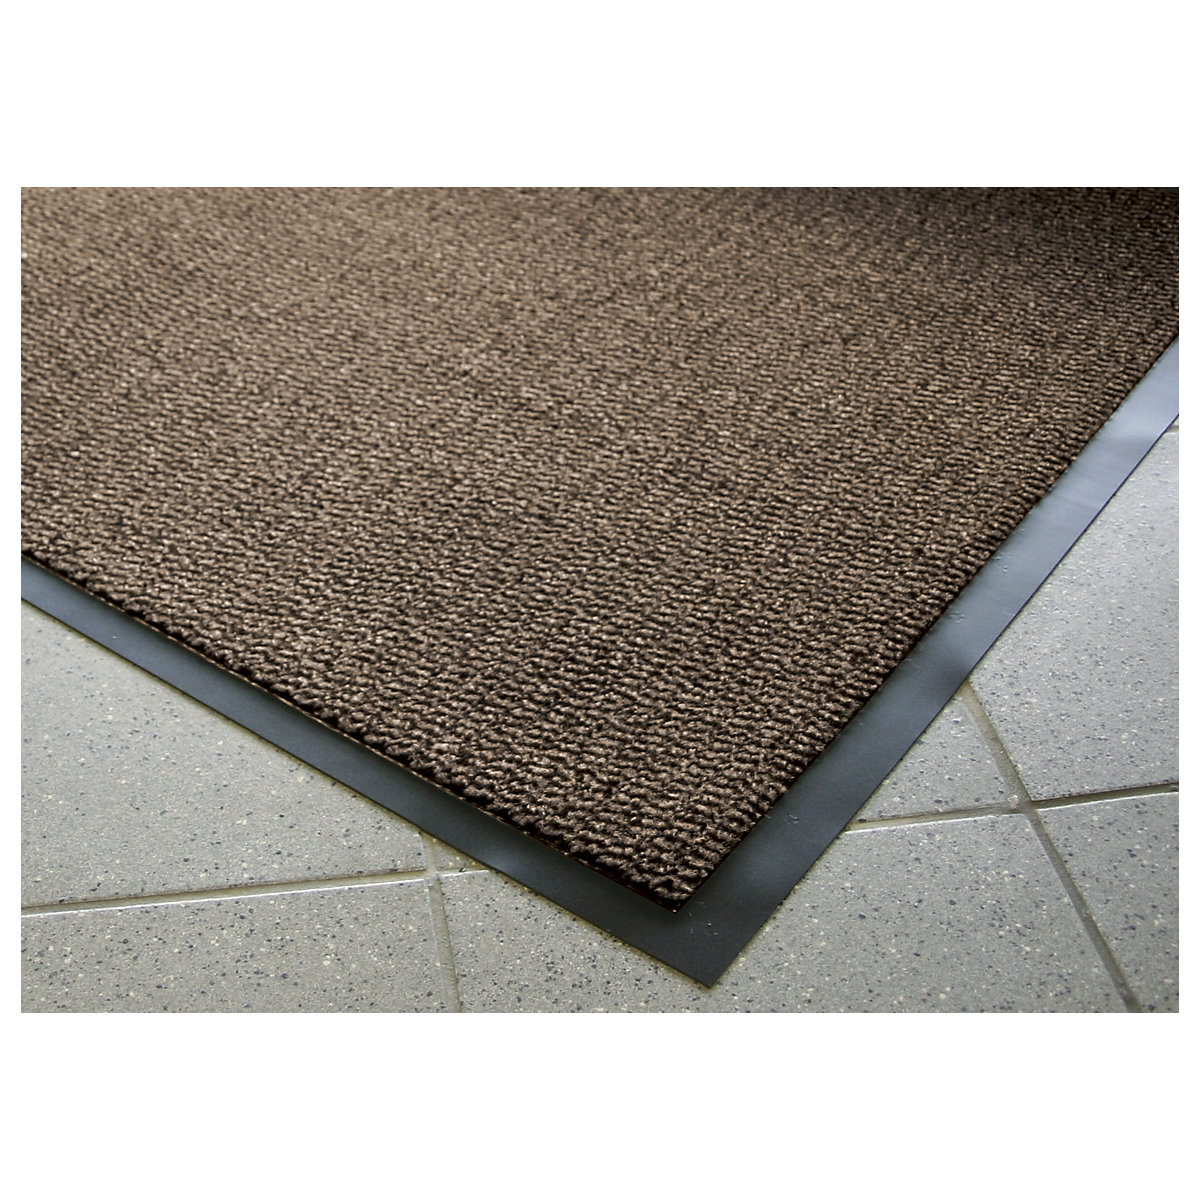 Entrance matting for indoor use, polypropylene pile, width 900 mm, sold by the metre, black / brown